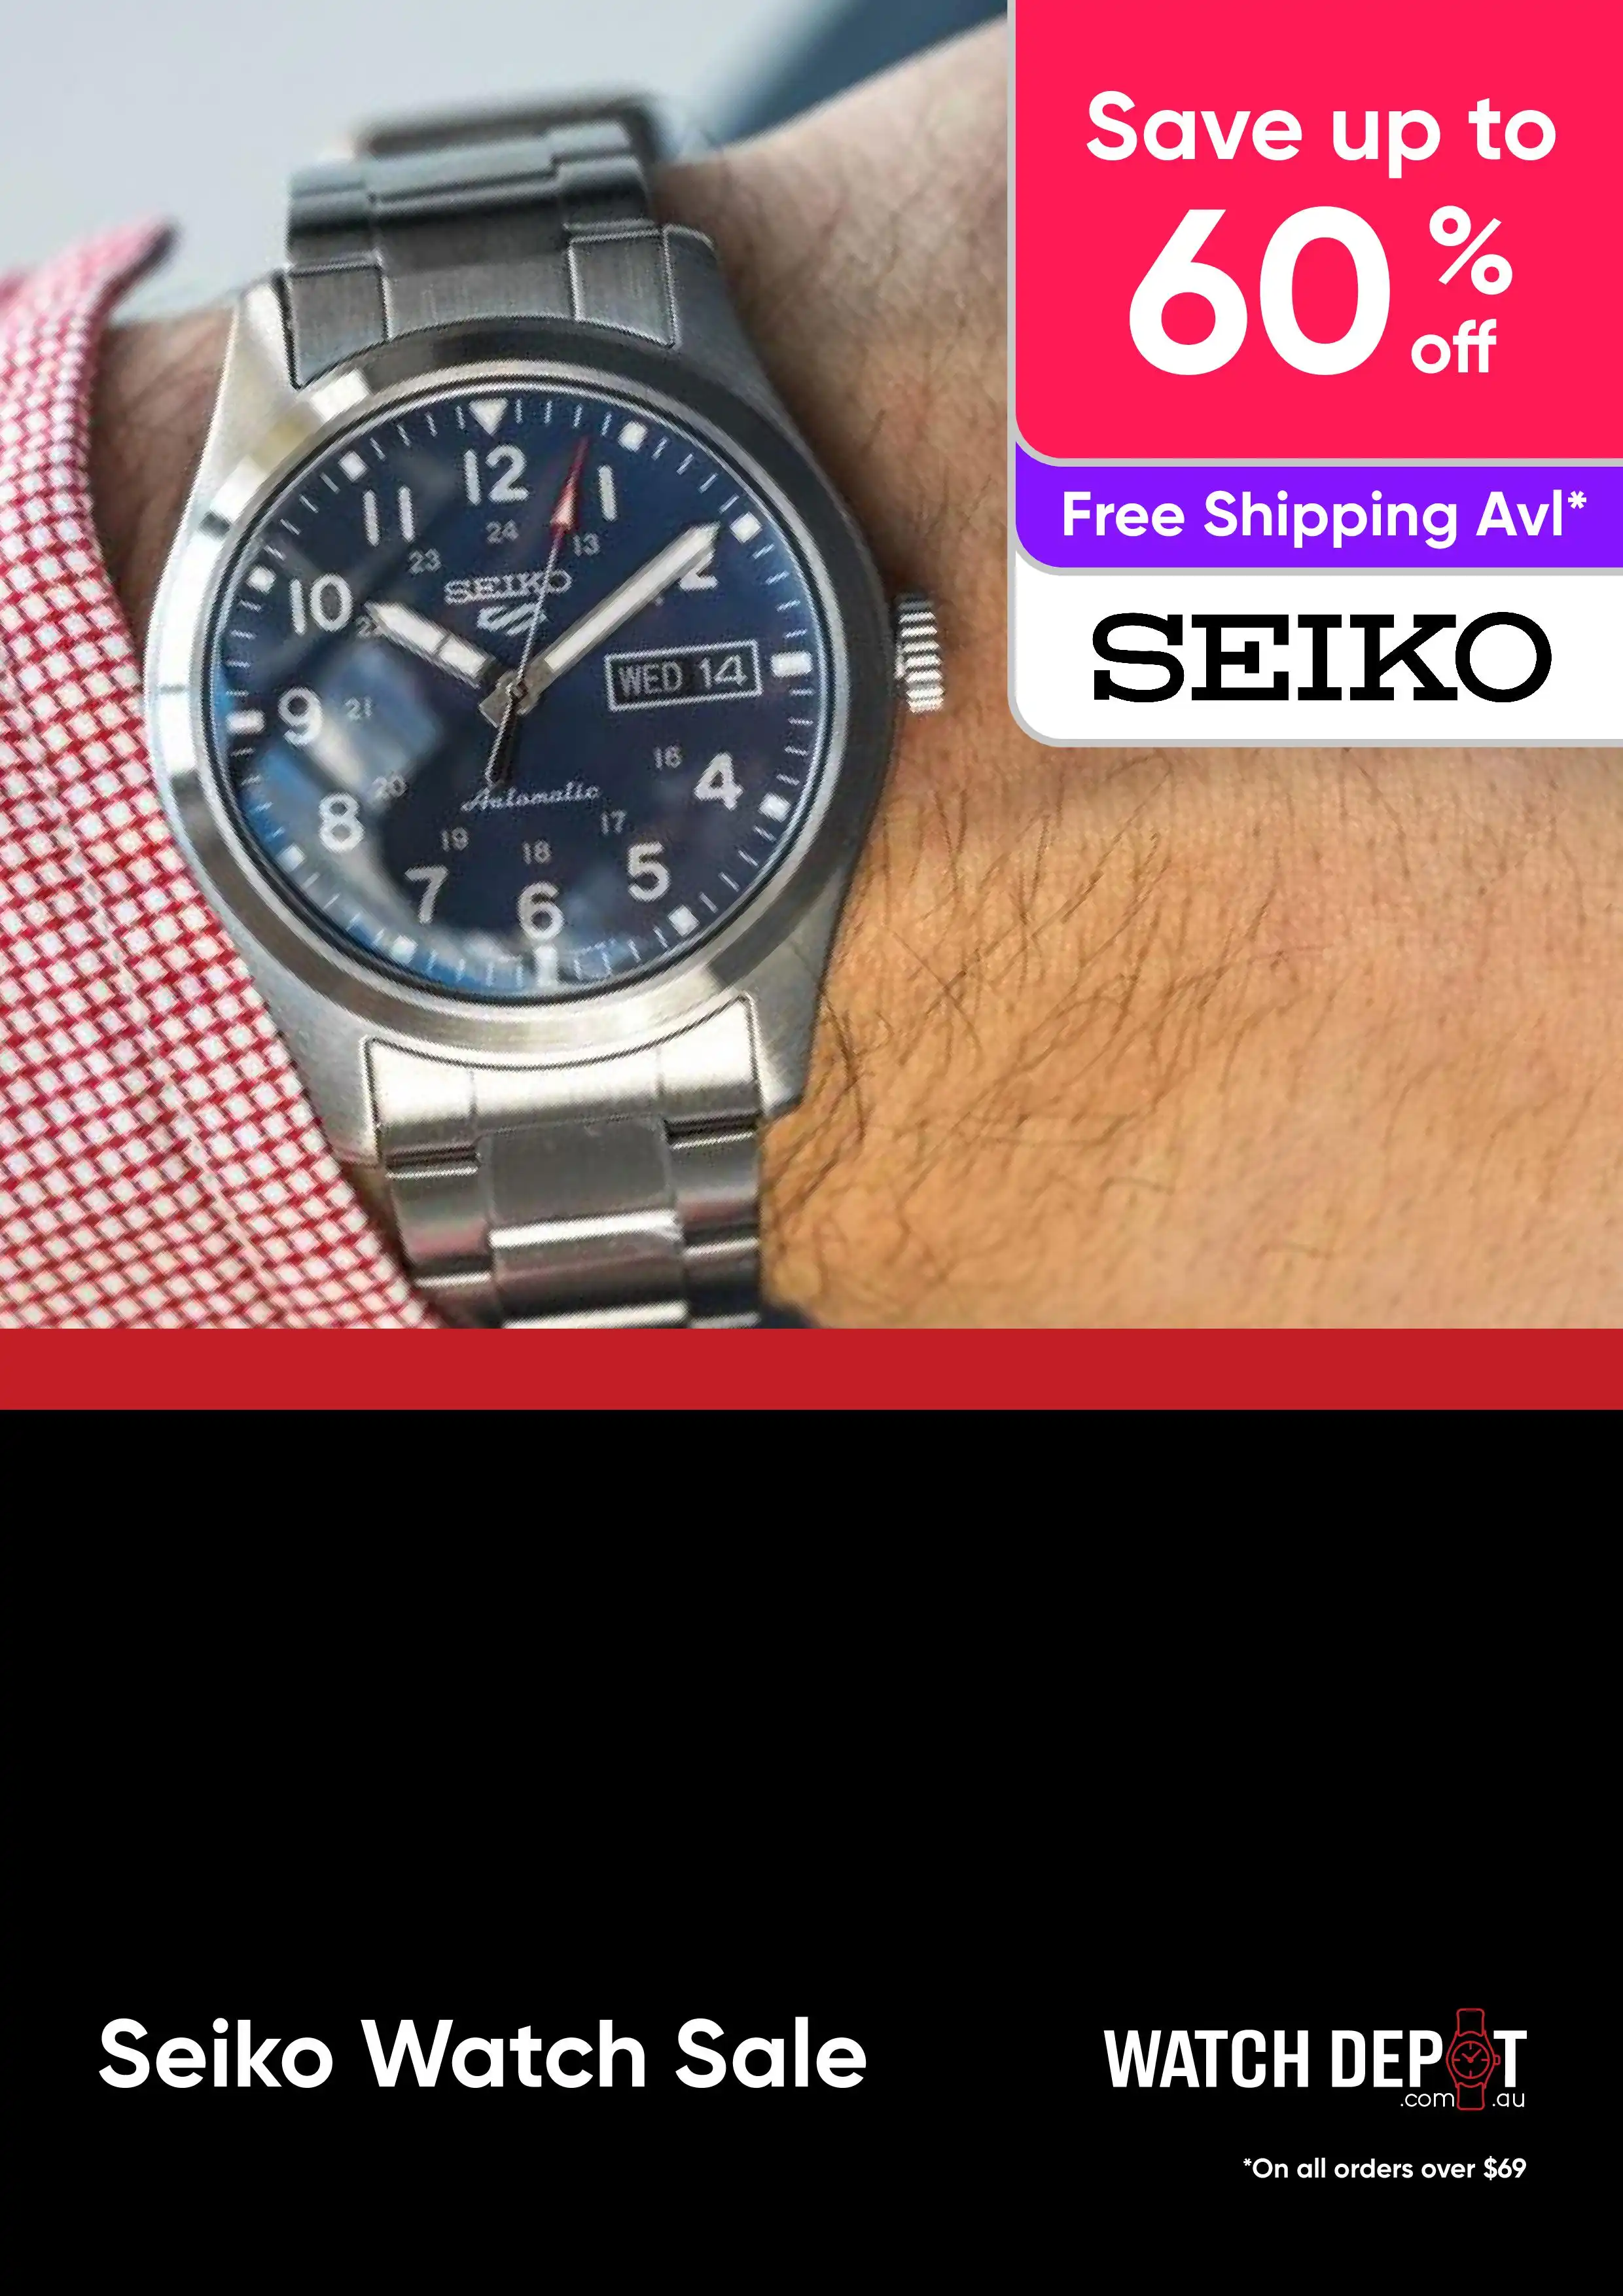 Seiko Watch Sale - Up to 60% off